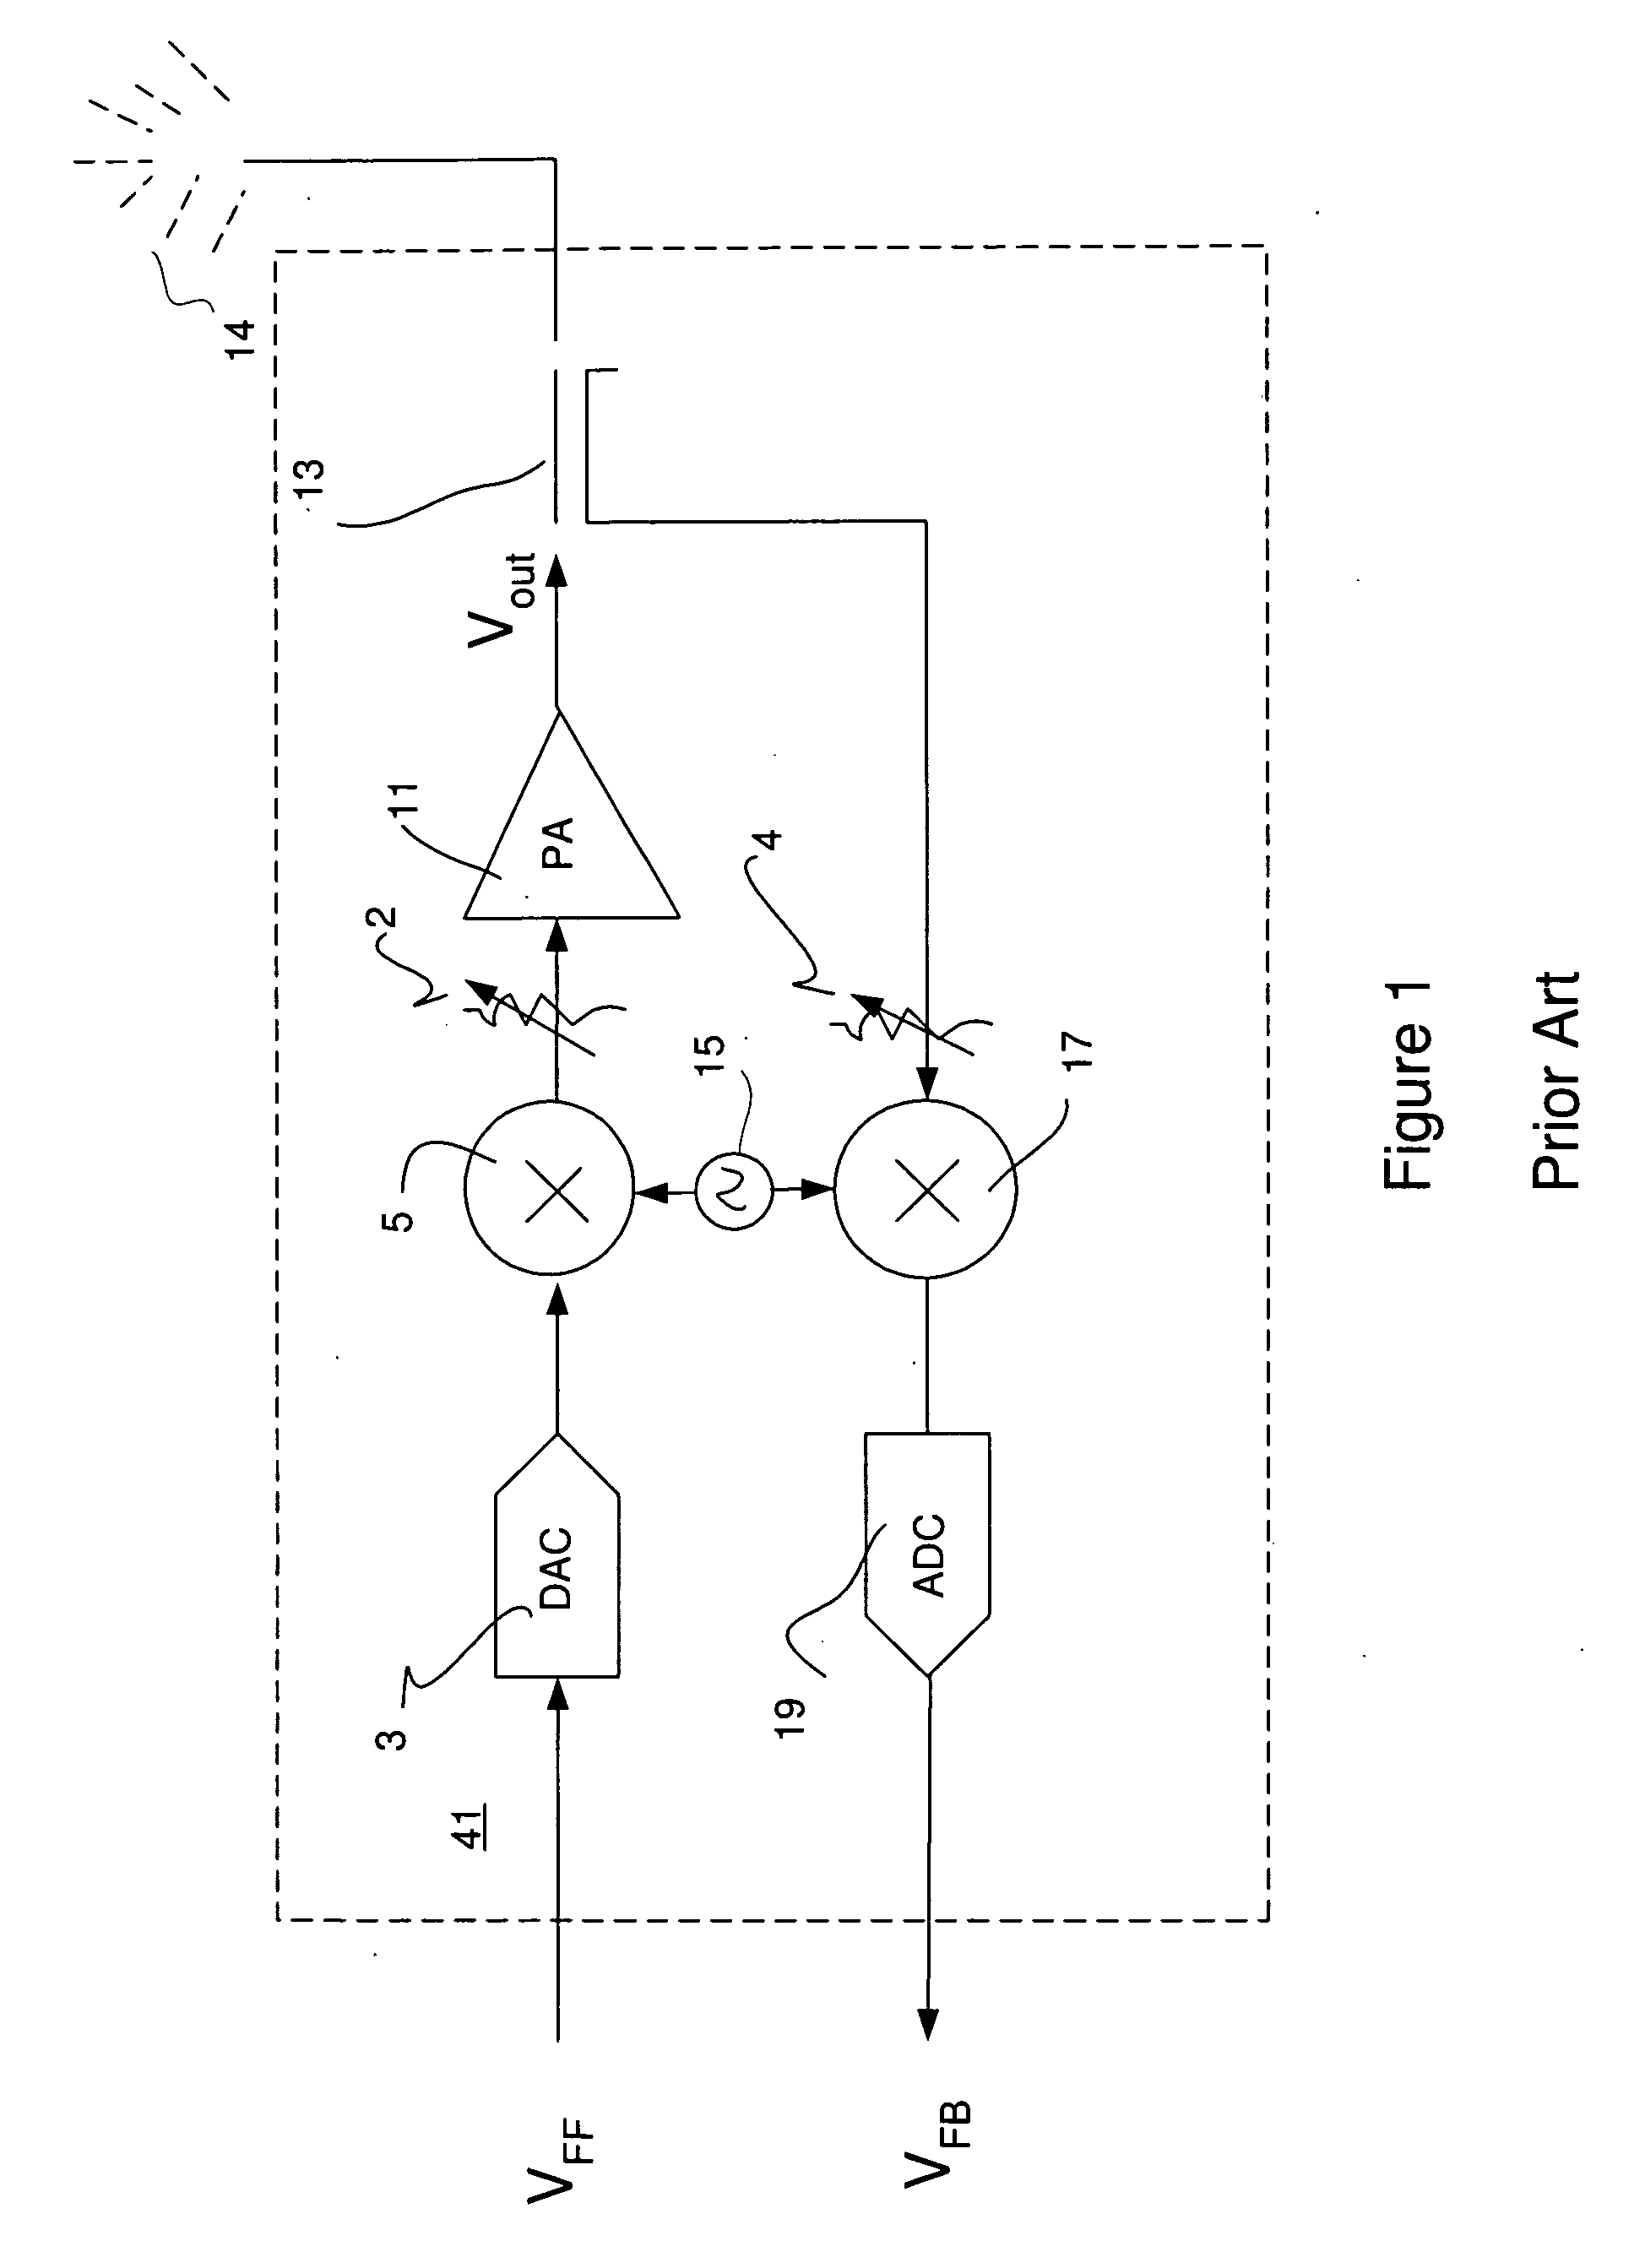 System and methods for digitally correcting a non-linear element using a digital filter for predistortion